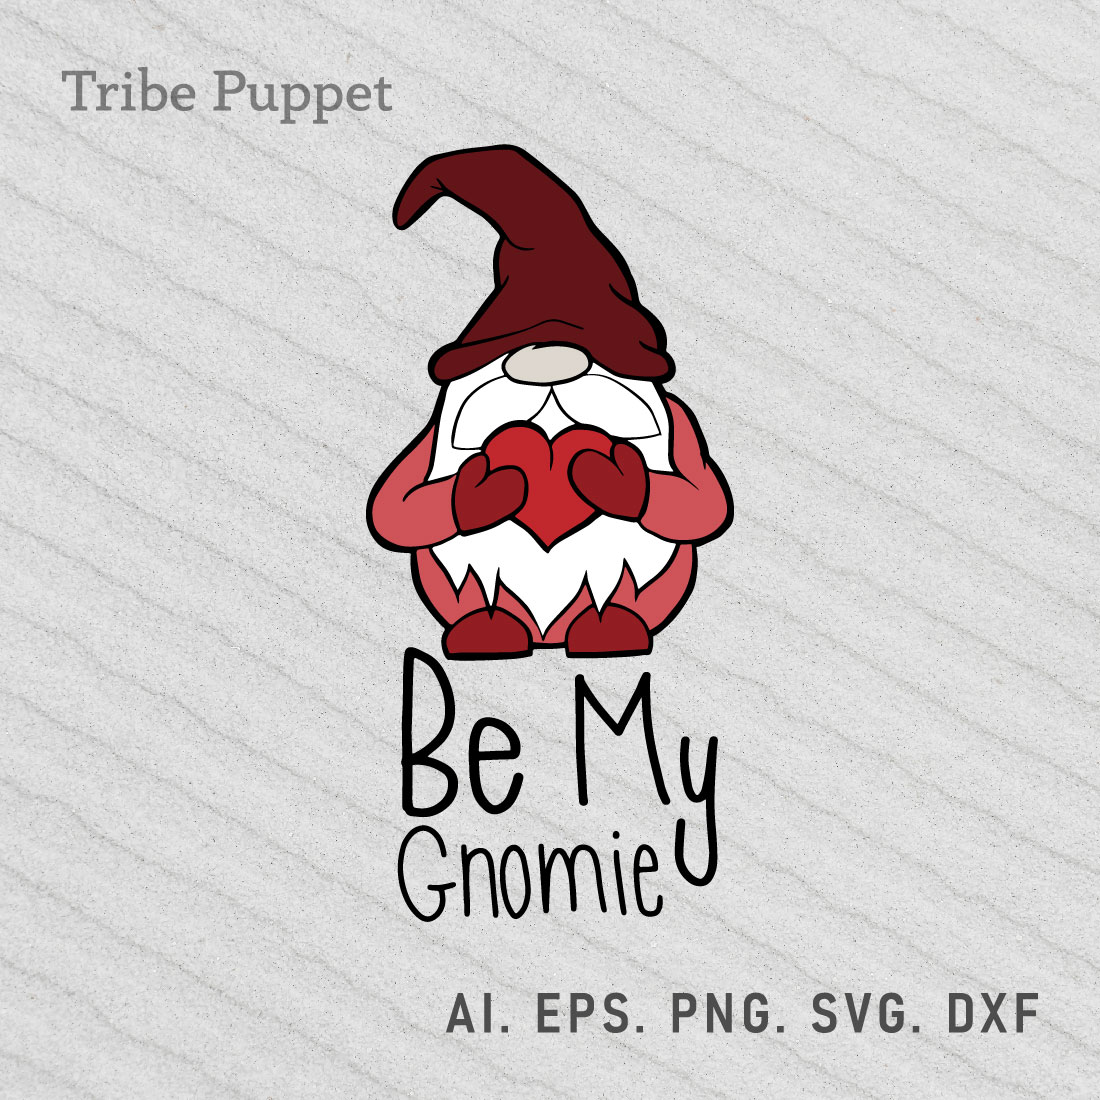 Be My Gnomie preview image.